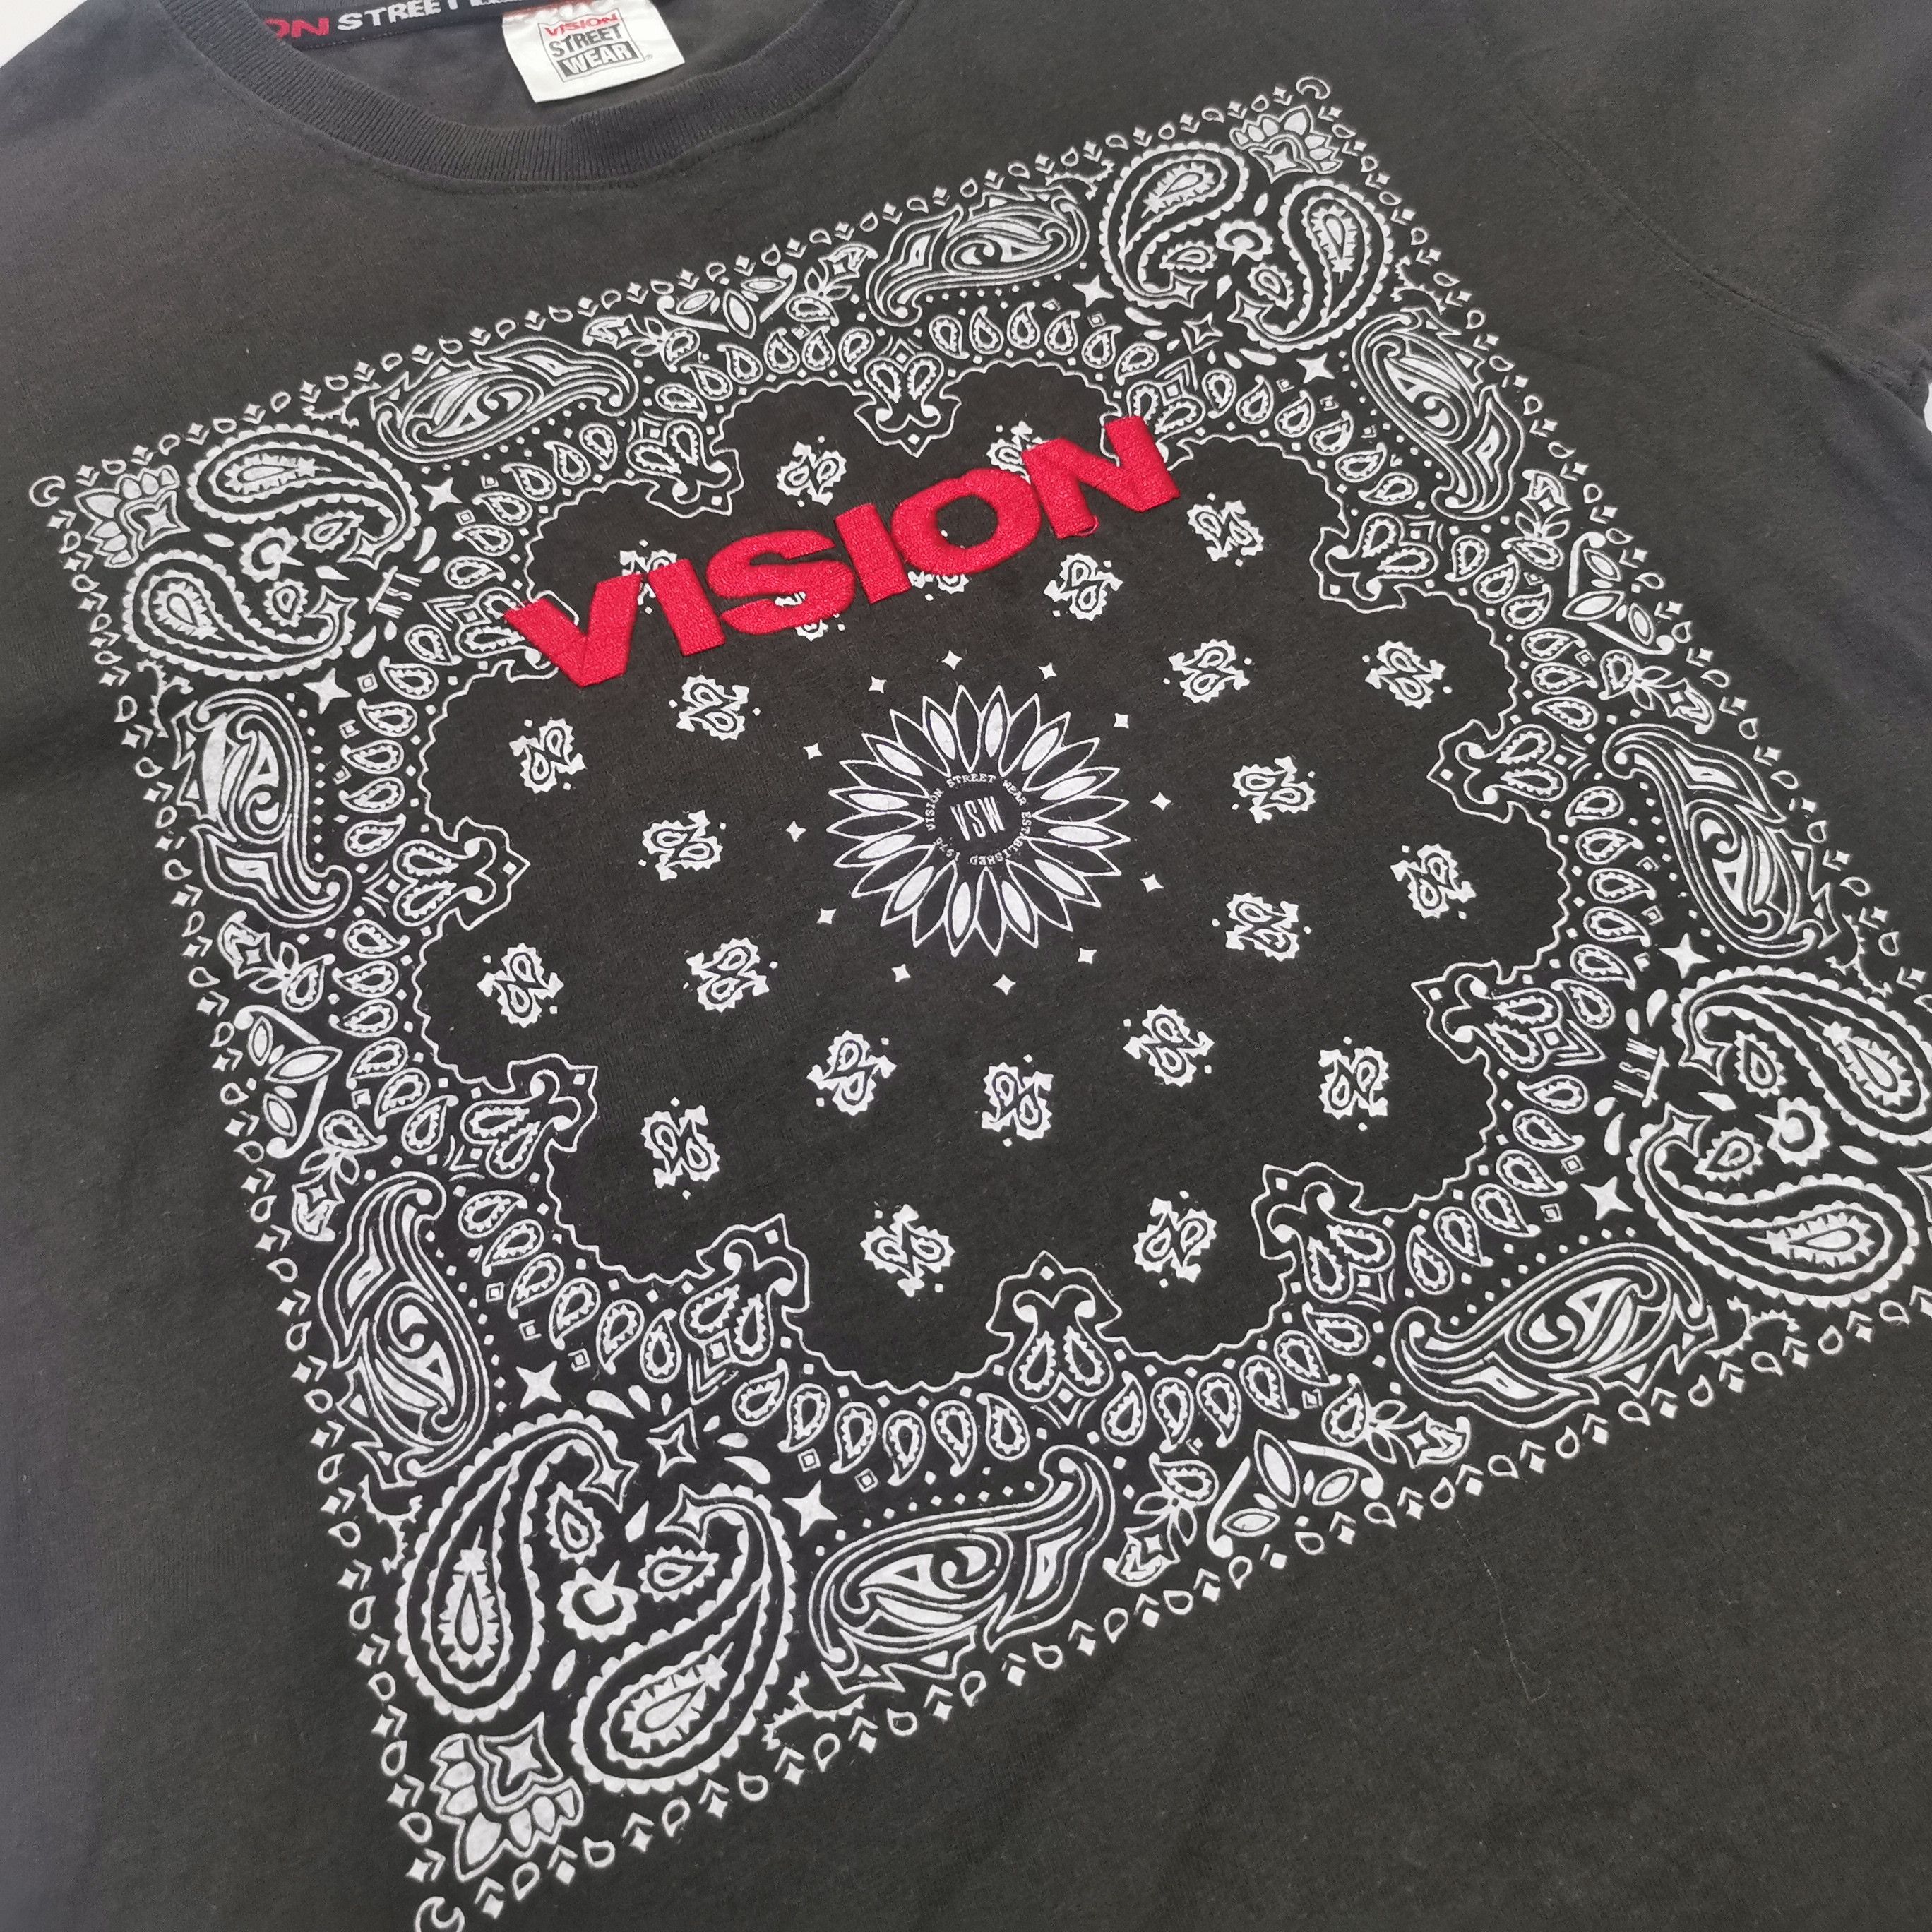 Vintage - Vision Street Wear Embroidery Spell Out Tshirt - 2